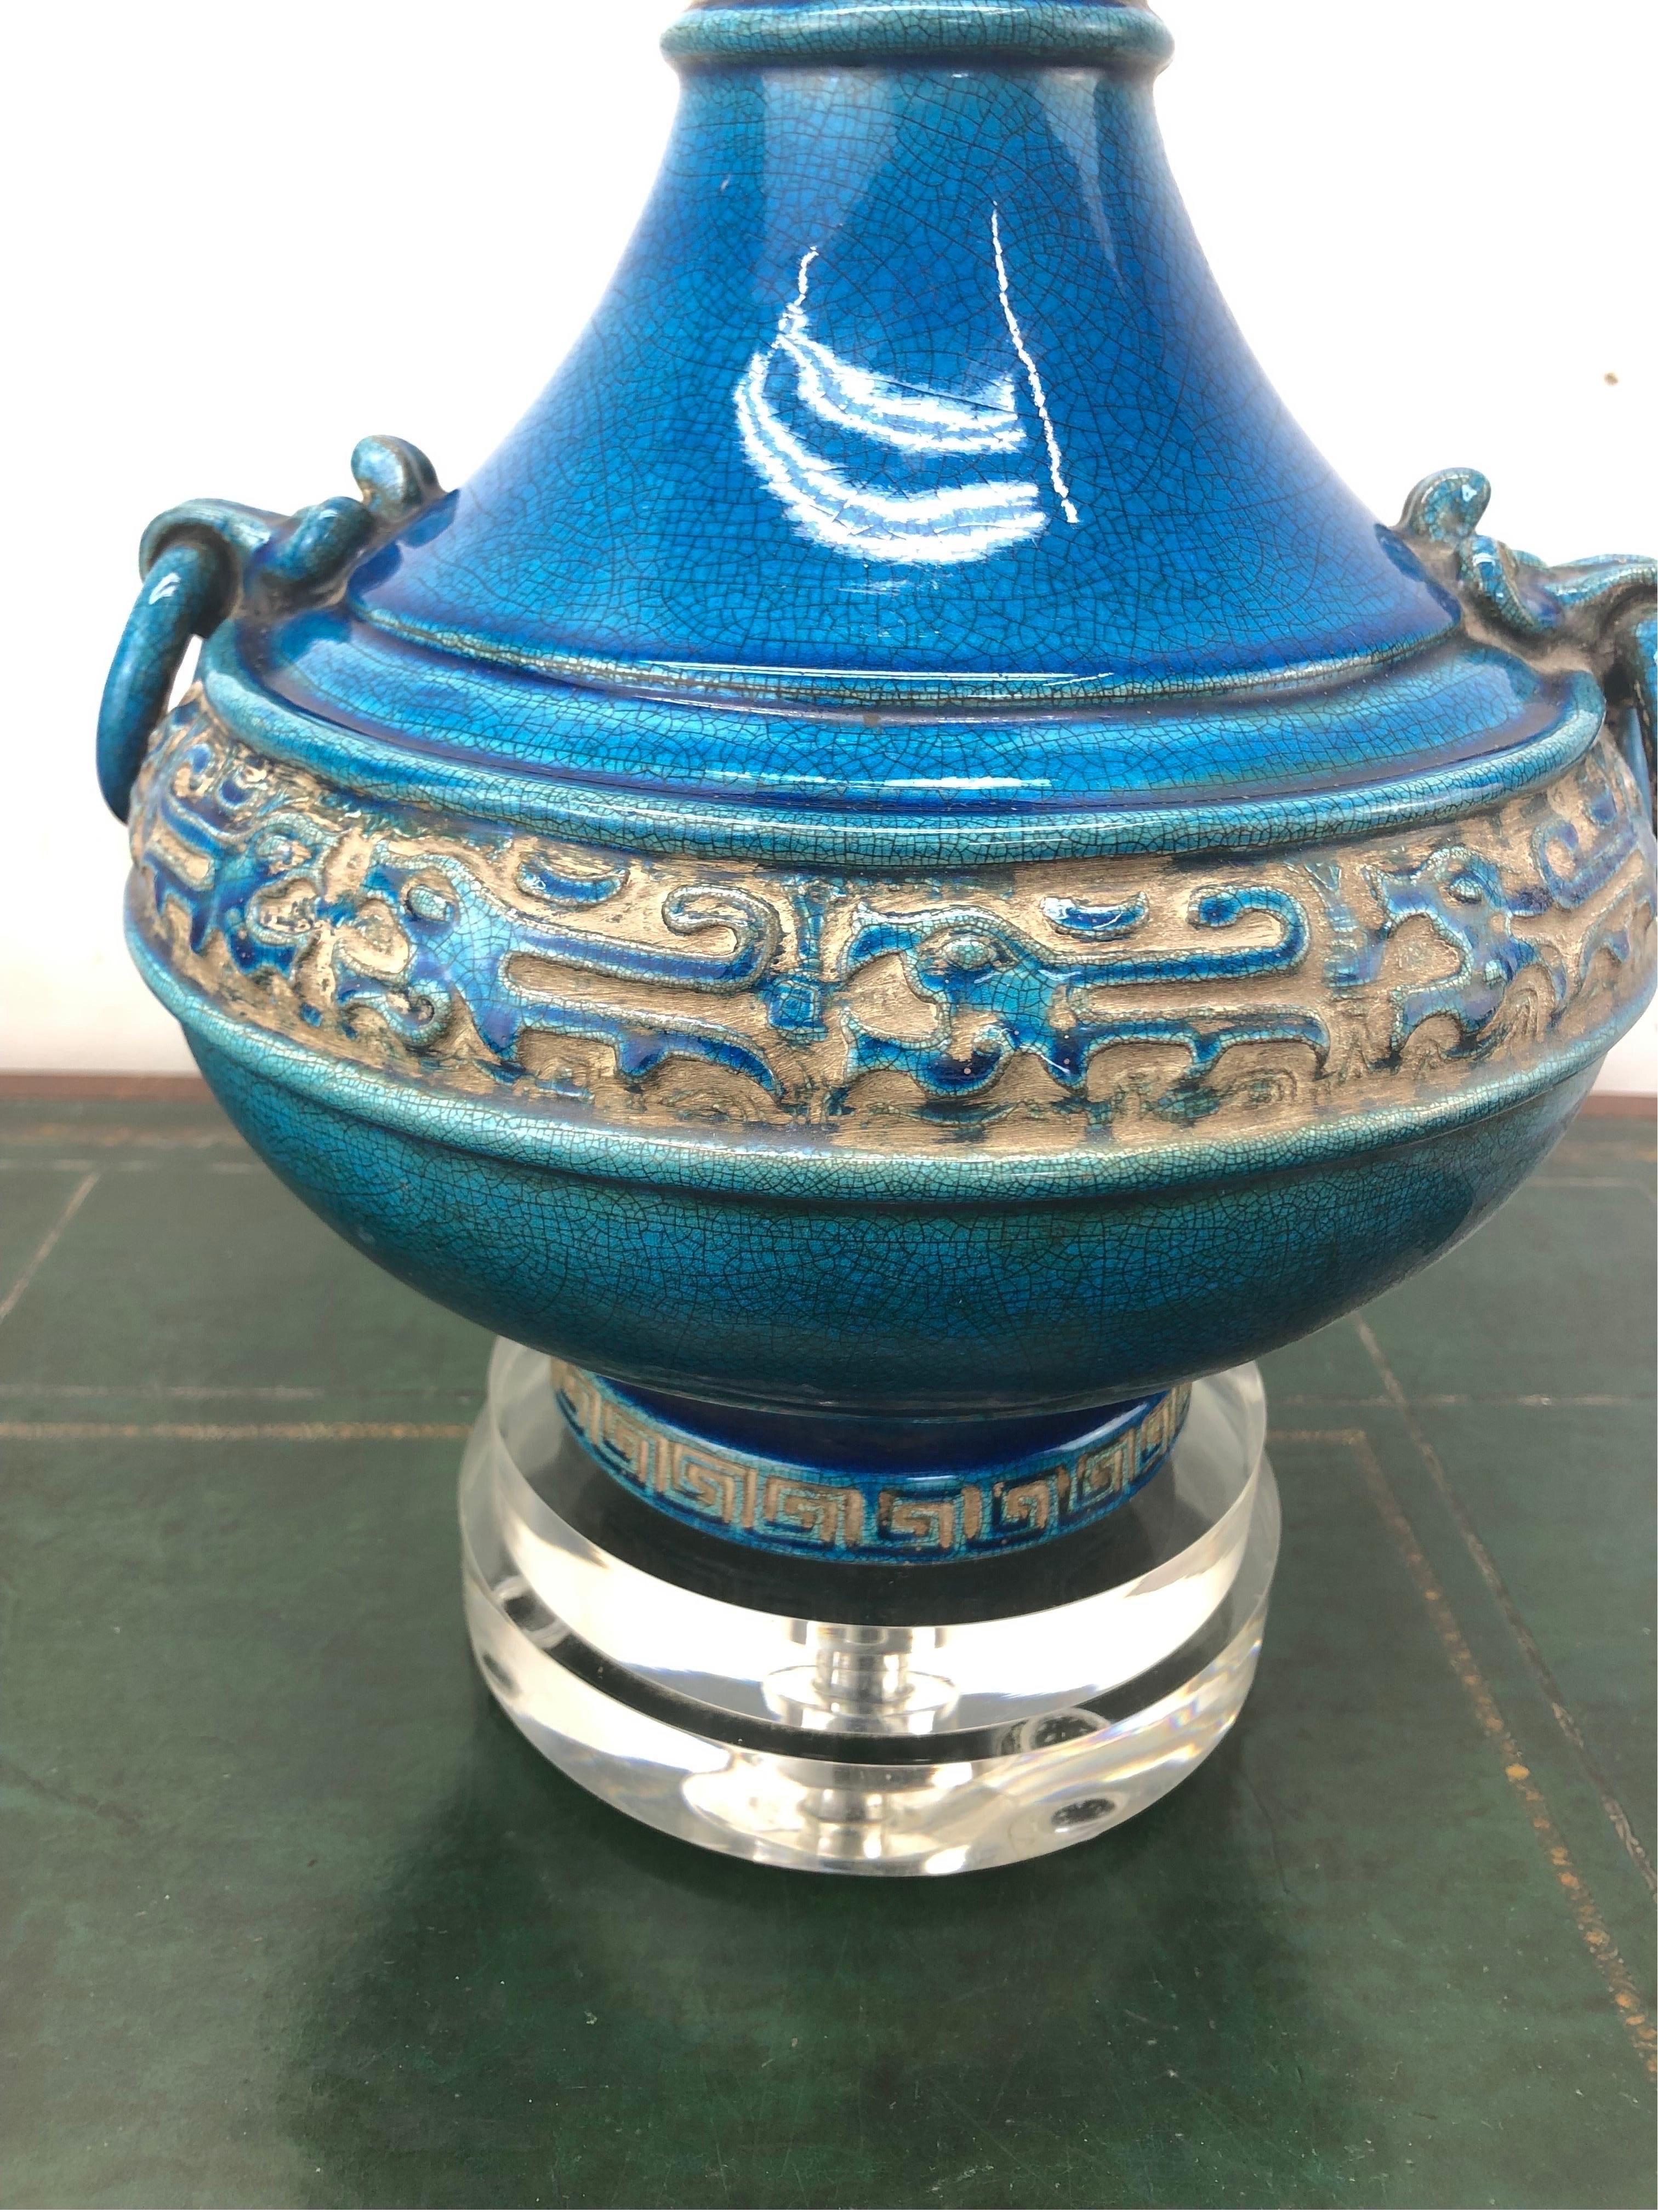 Vintage Italian Glazed Chinoiserie Crackle Turquoise Lamp. Designed to mimic buried Chinese porcelain, the vibrant turquoise crackle glaze nicely contrasts with Chinese inspired design. Mounted on a double lucite base and newly wired.